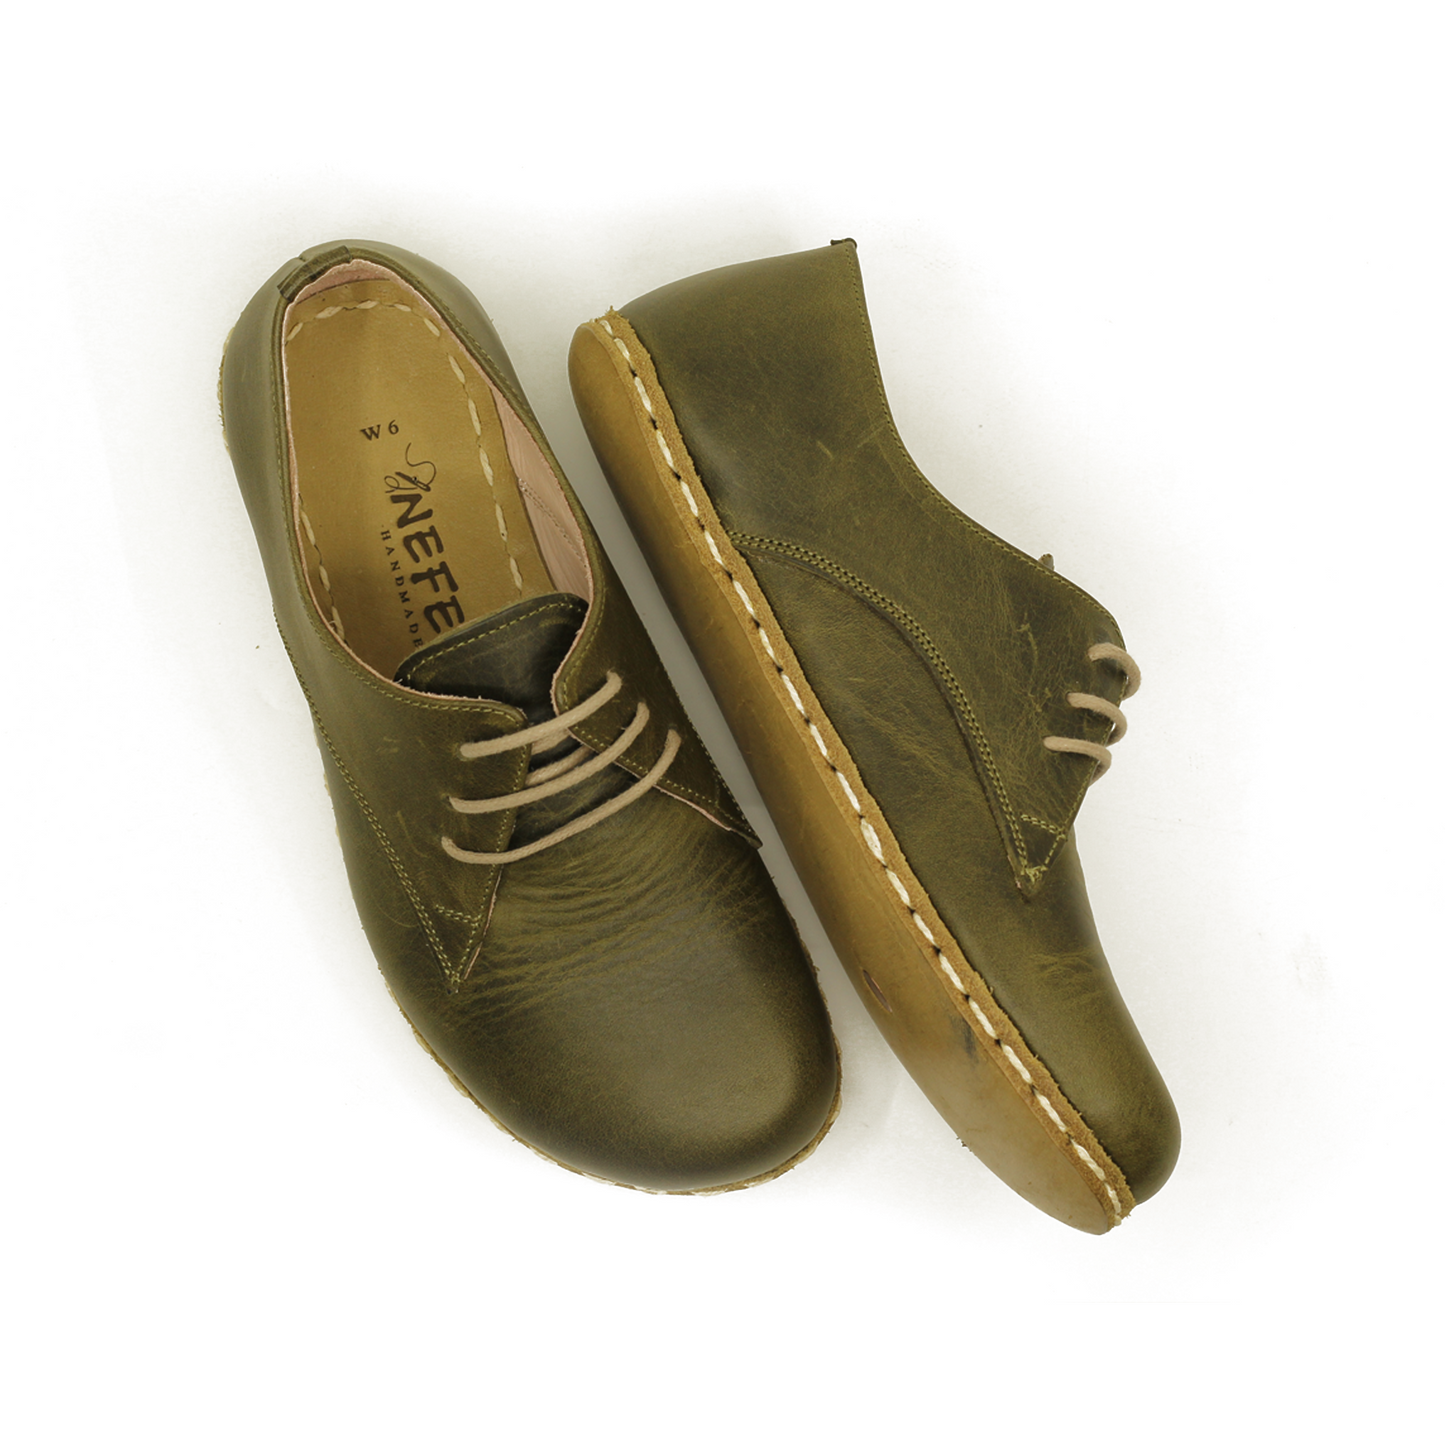 Men's Laced Barefoot Shoes - Military Green Leather